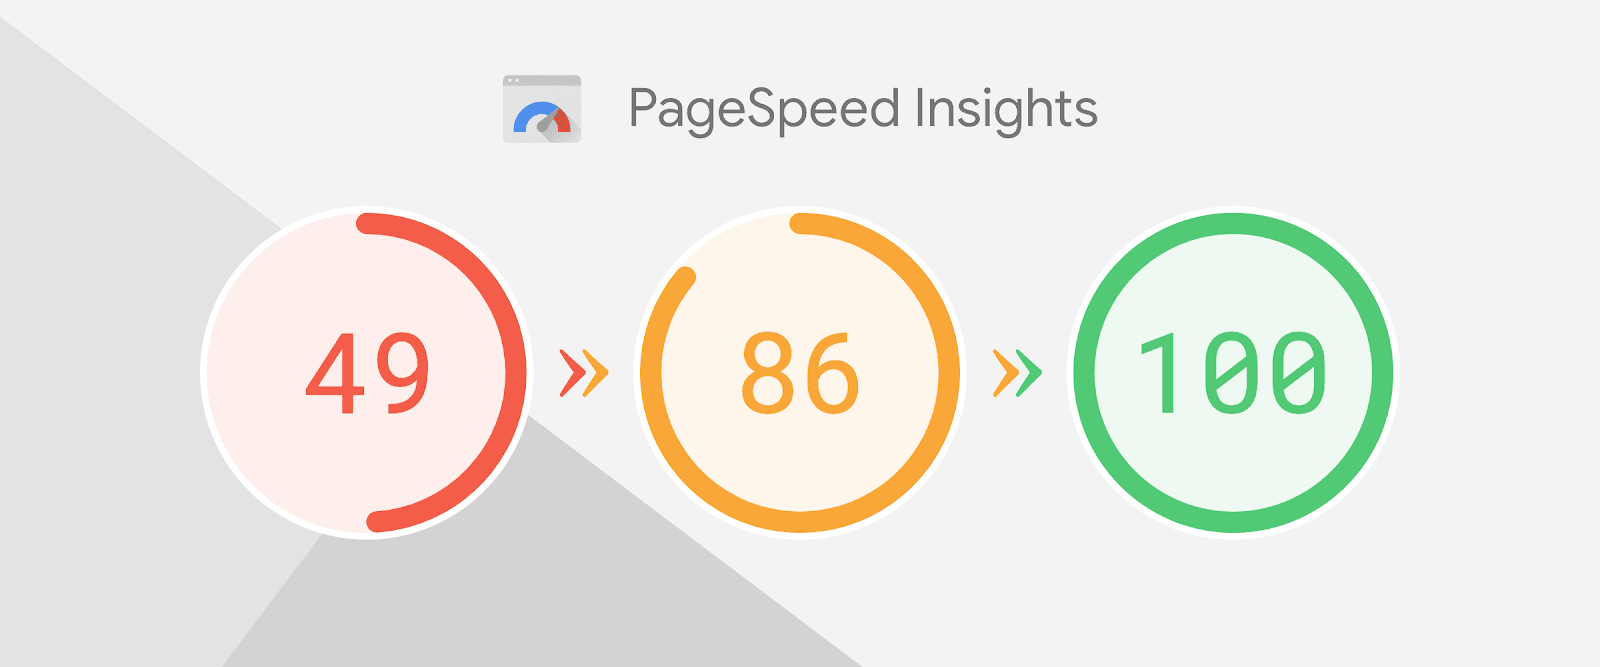 how to do SEO for ecommerce website pagespeed score